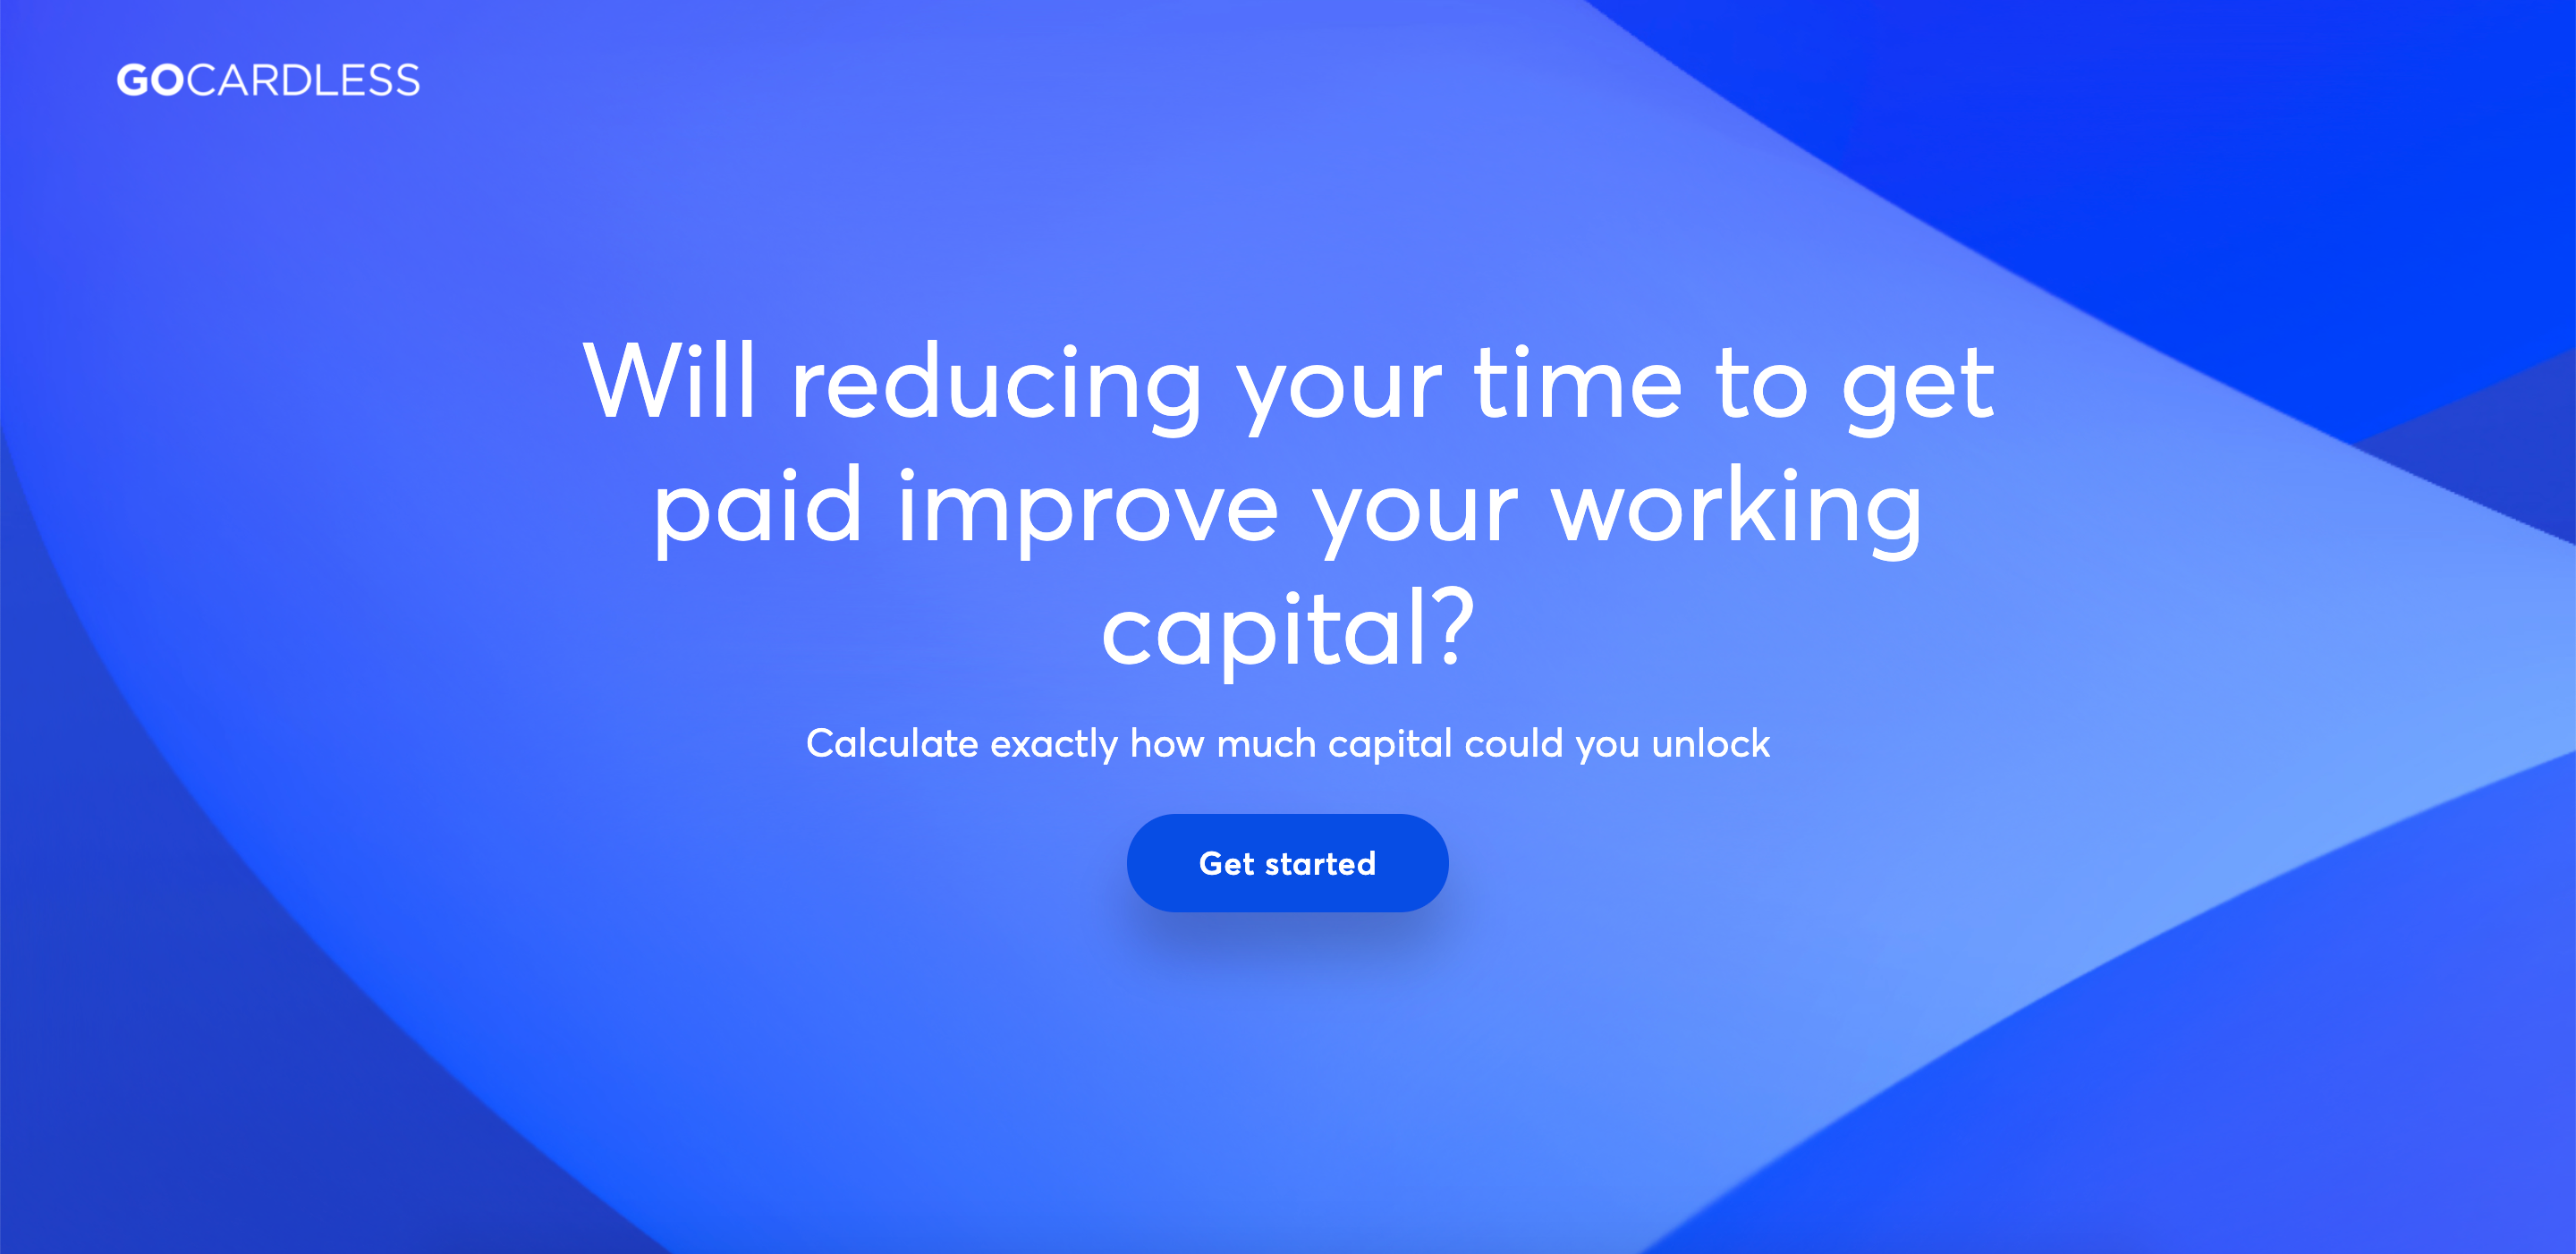 Will reducing your time to get paid improve your working capital?